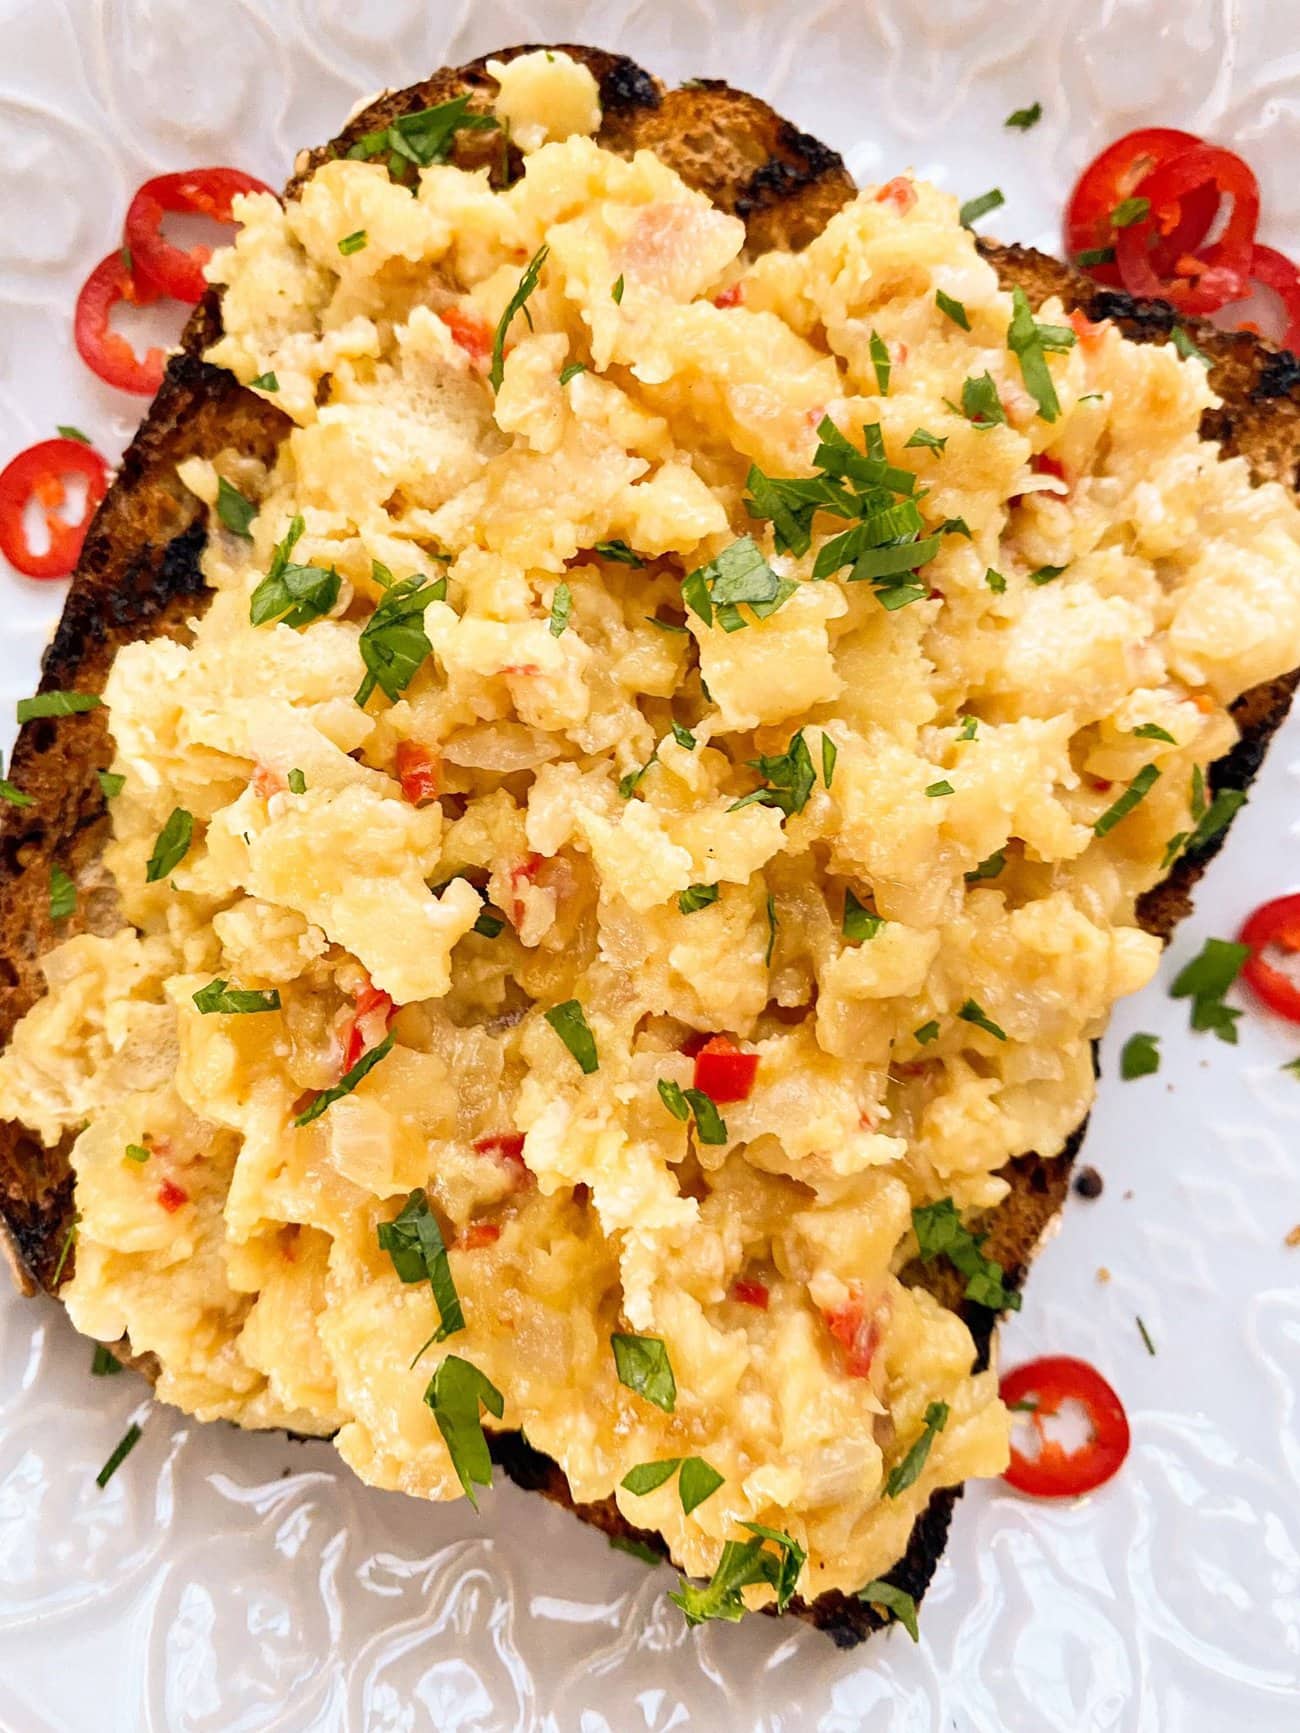 Chili scrambled eggs served on top of a slice of toasted granary bread, garnished with fresh sliced red chili and chopped parsley